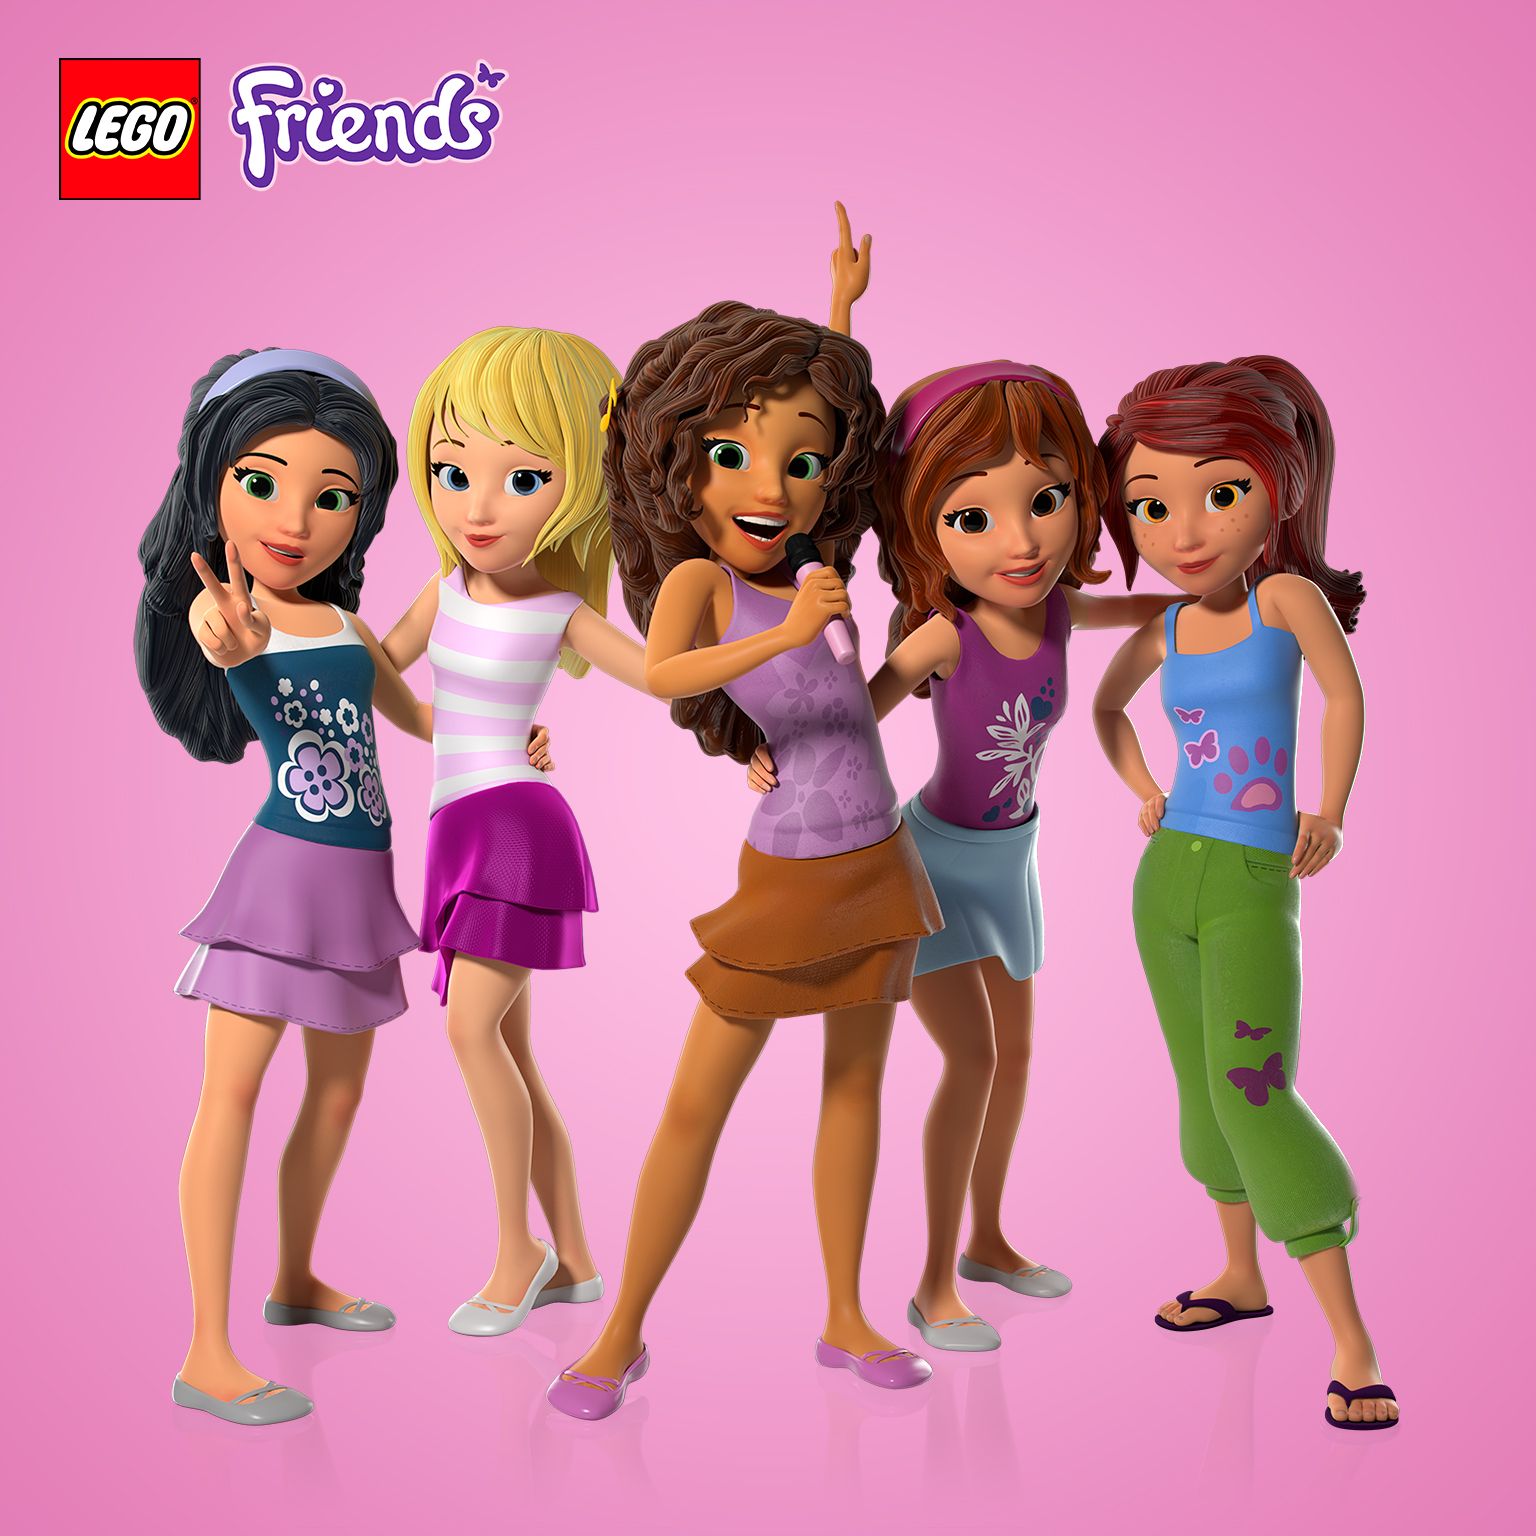 Lego Friends Wallpapers on WallpaperDog. 